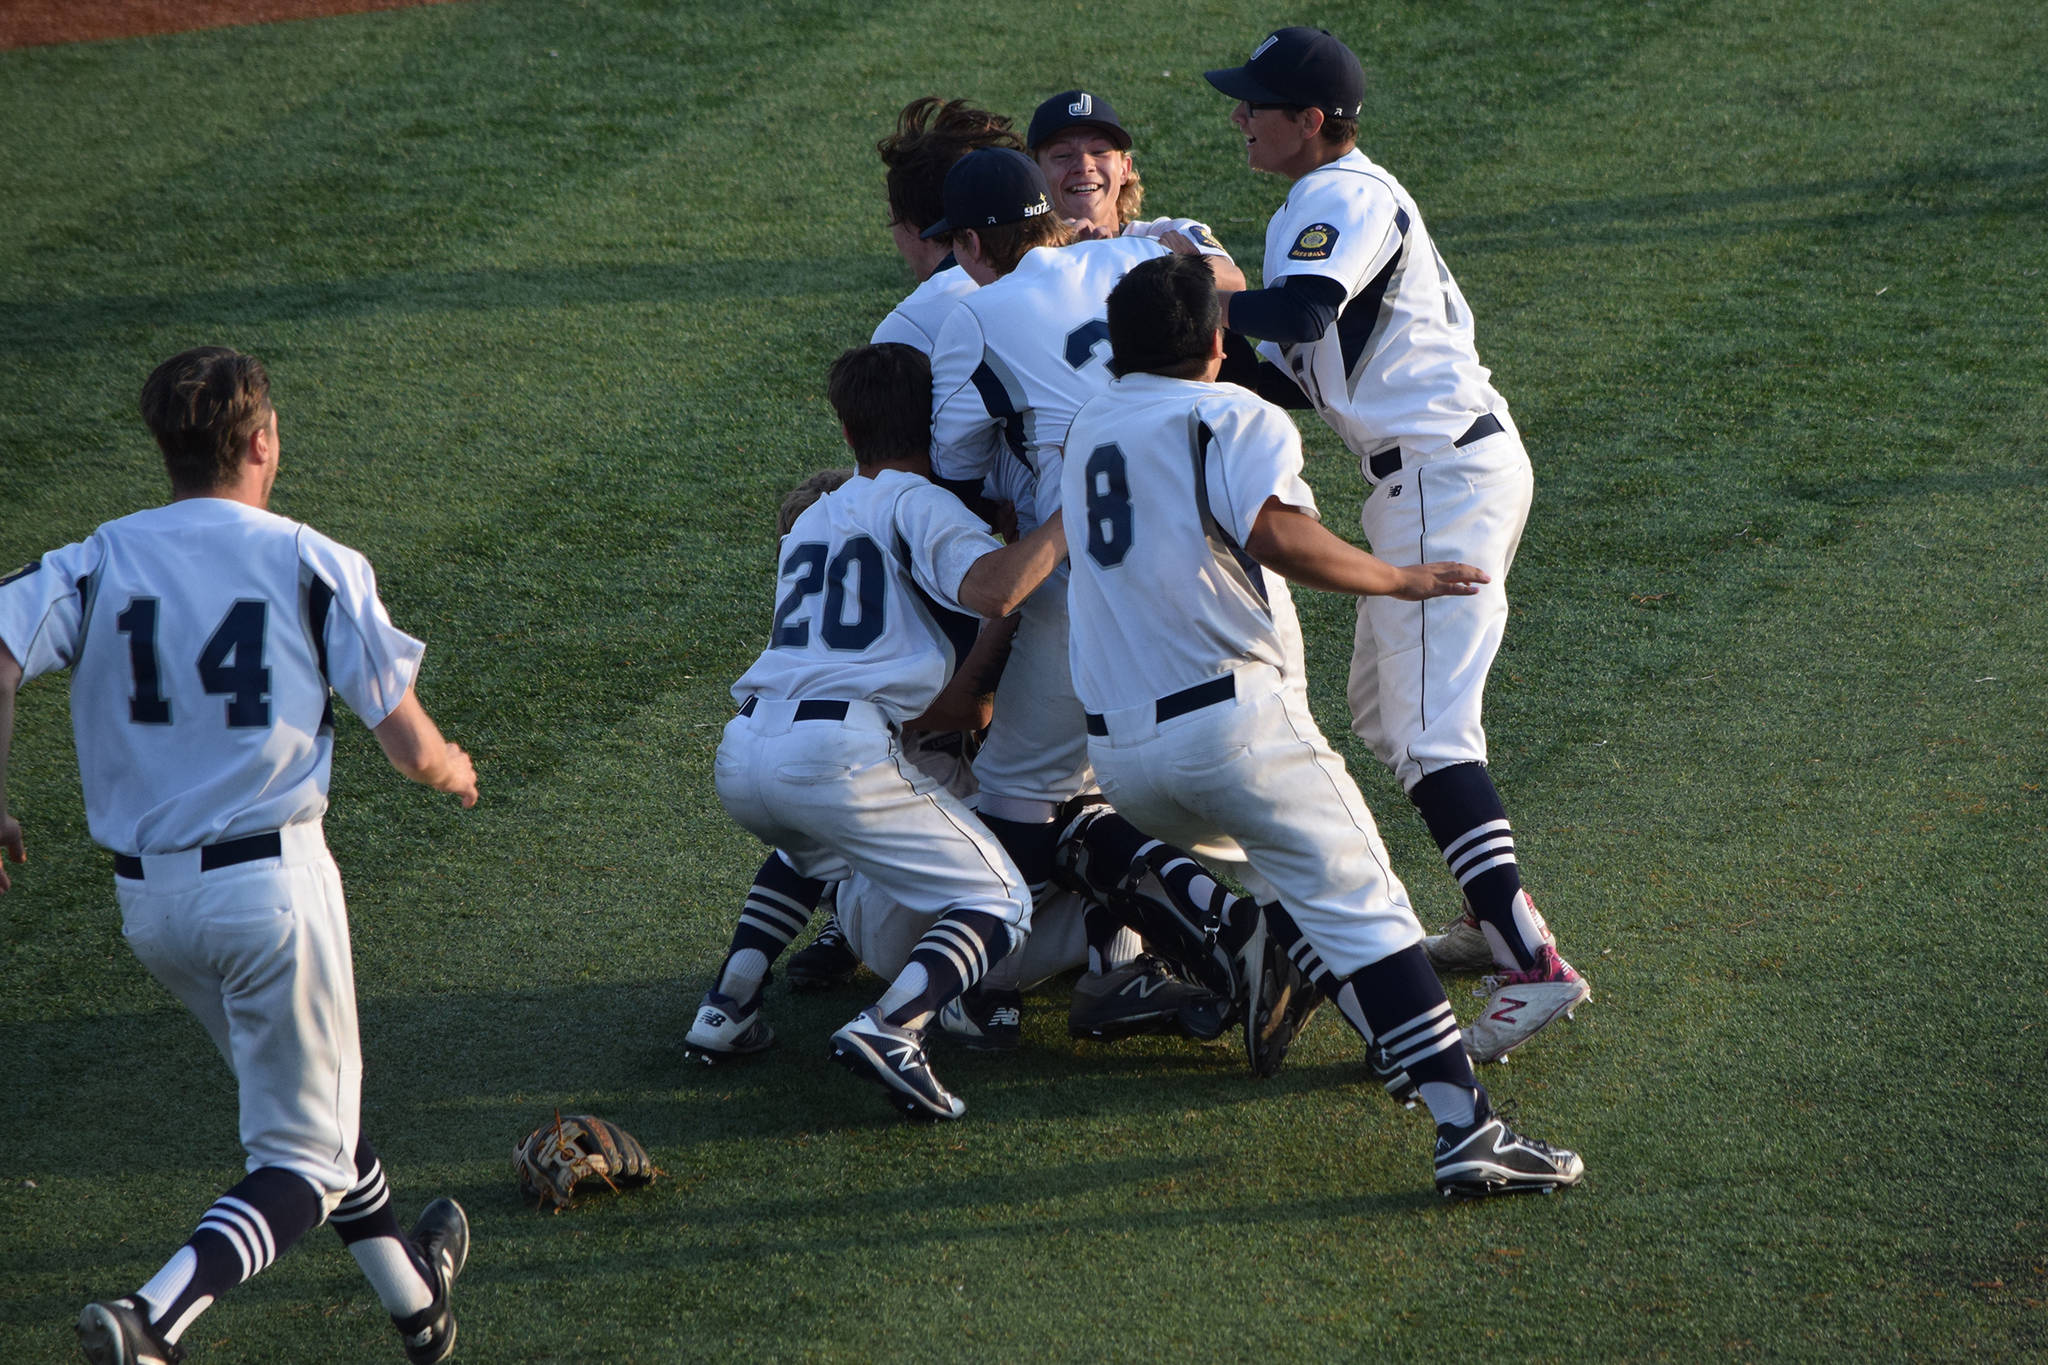 The Juneau Post 25 baseball team celebrates winning its consecutive American Legion state championship at Mulcahy Stadium in Anchorage on Tuesday, July 31, 2019. Juneau defeated Wasilla Post 35, 13-8, in an eight-inning thriller after topping South Post 4, 5-4, in another extra innings game. (Nolin Ainsworth | Juneau Empire)